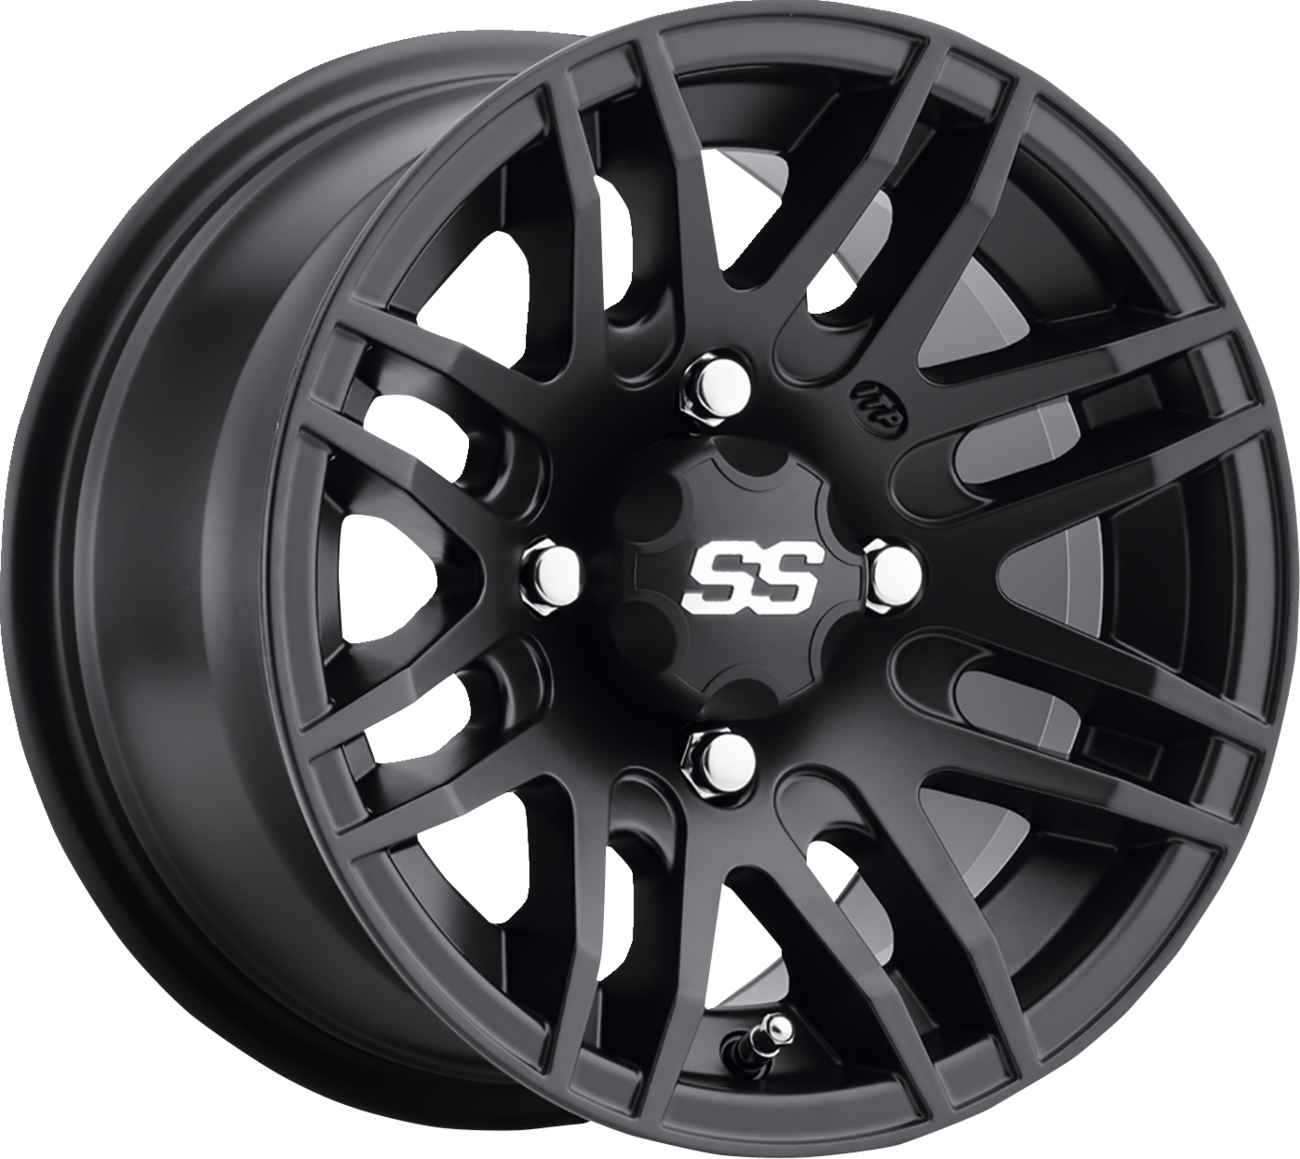 ITP SS316 Alloy Wheel - Front/Rear - Machined Black - 12x7 - 4/137 - 4+3 1228558536B